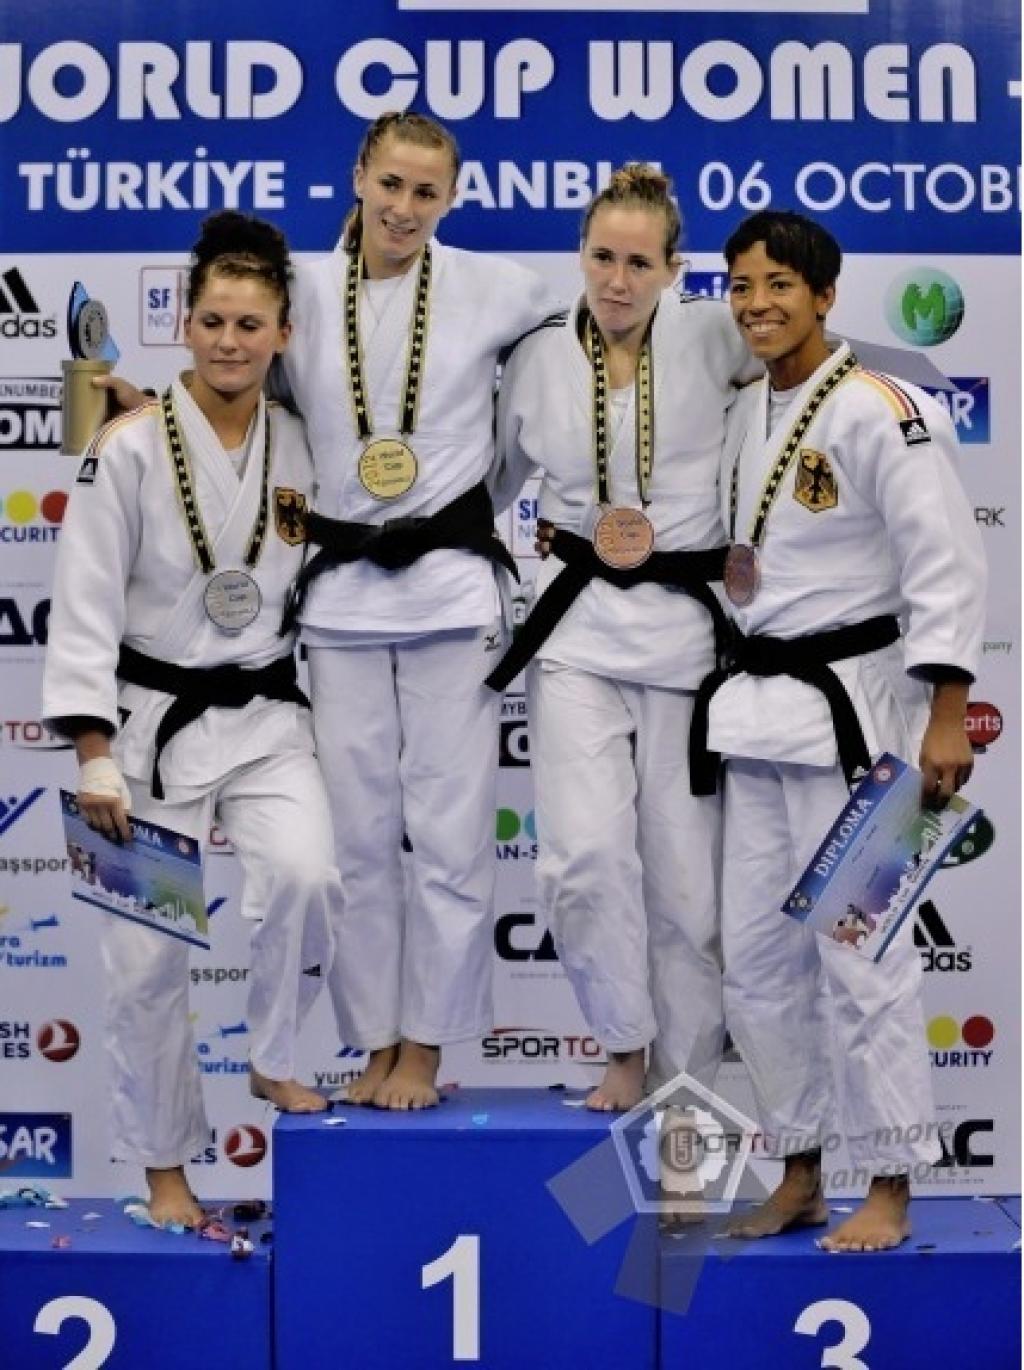 Seven winning nations at first World Cup in Istanbul